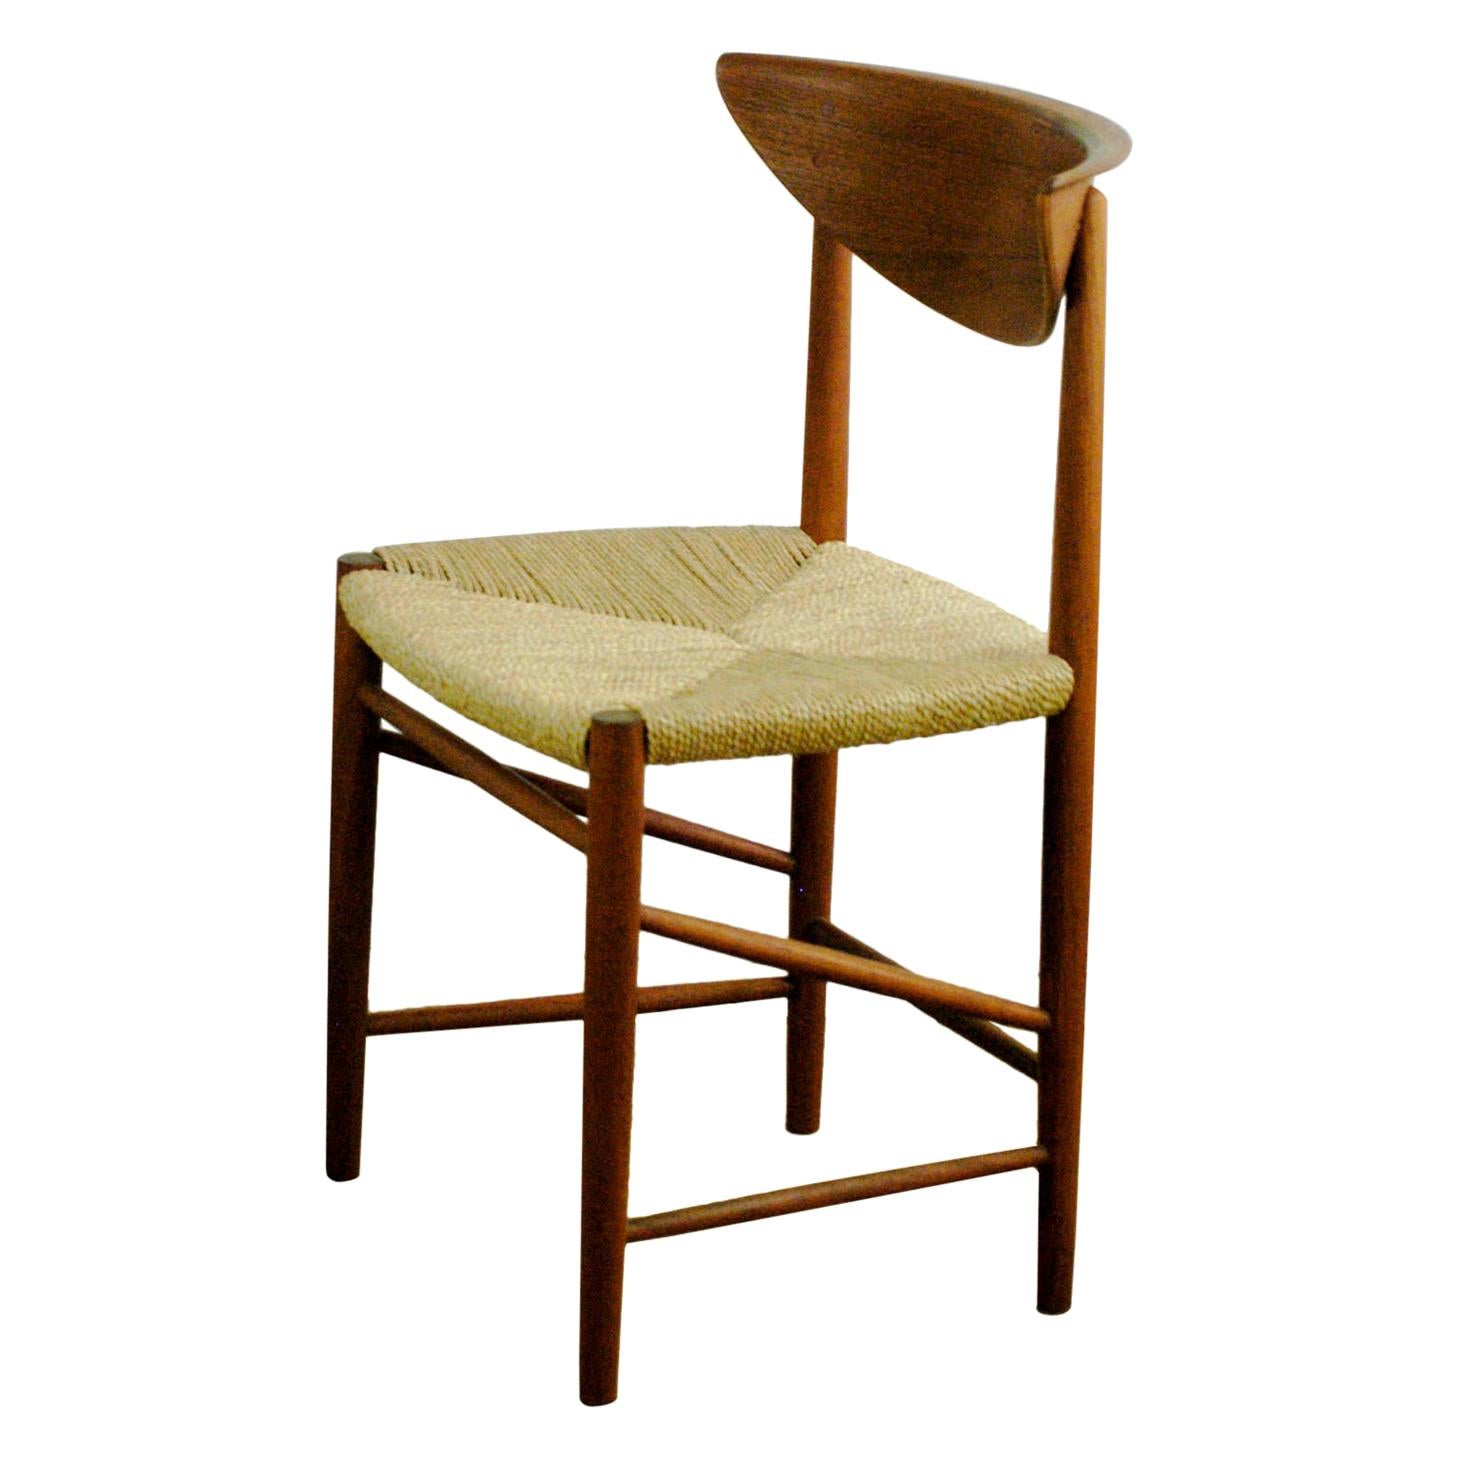 Scandinavian Modern Teak and Cane Dining Chair by Peter Hvidt for Soborg